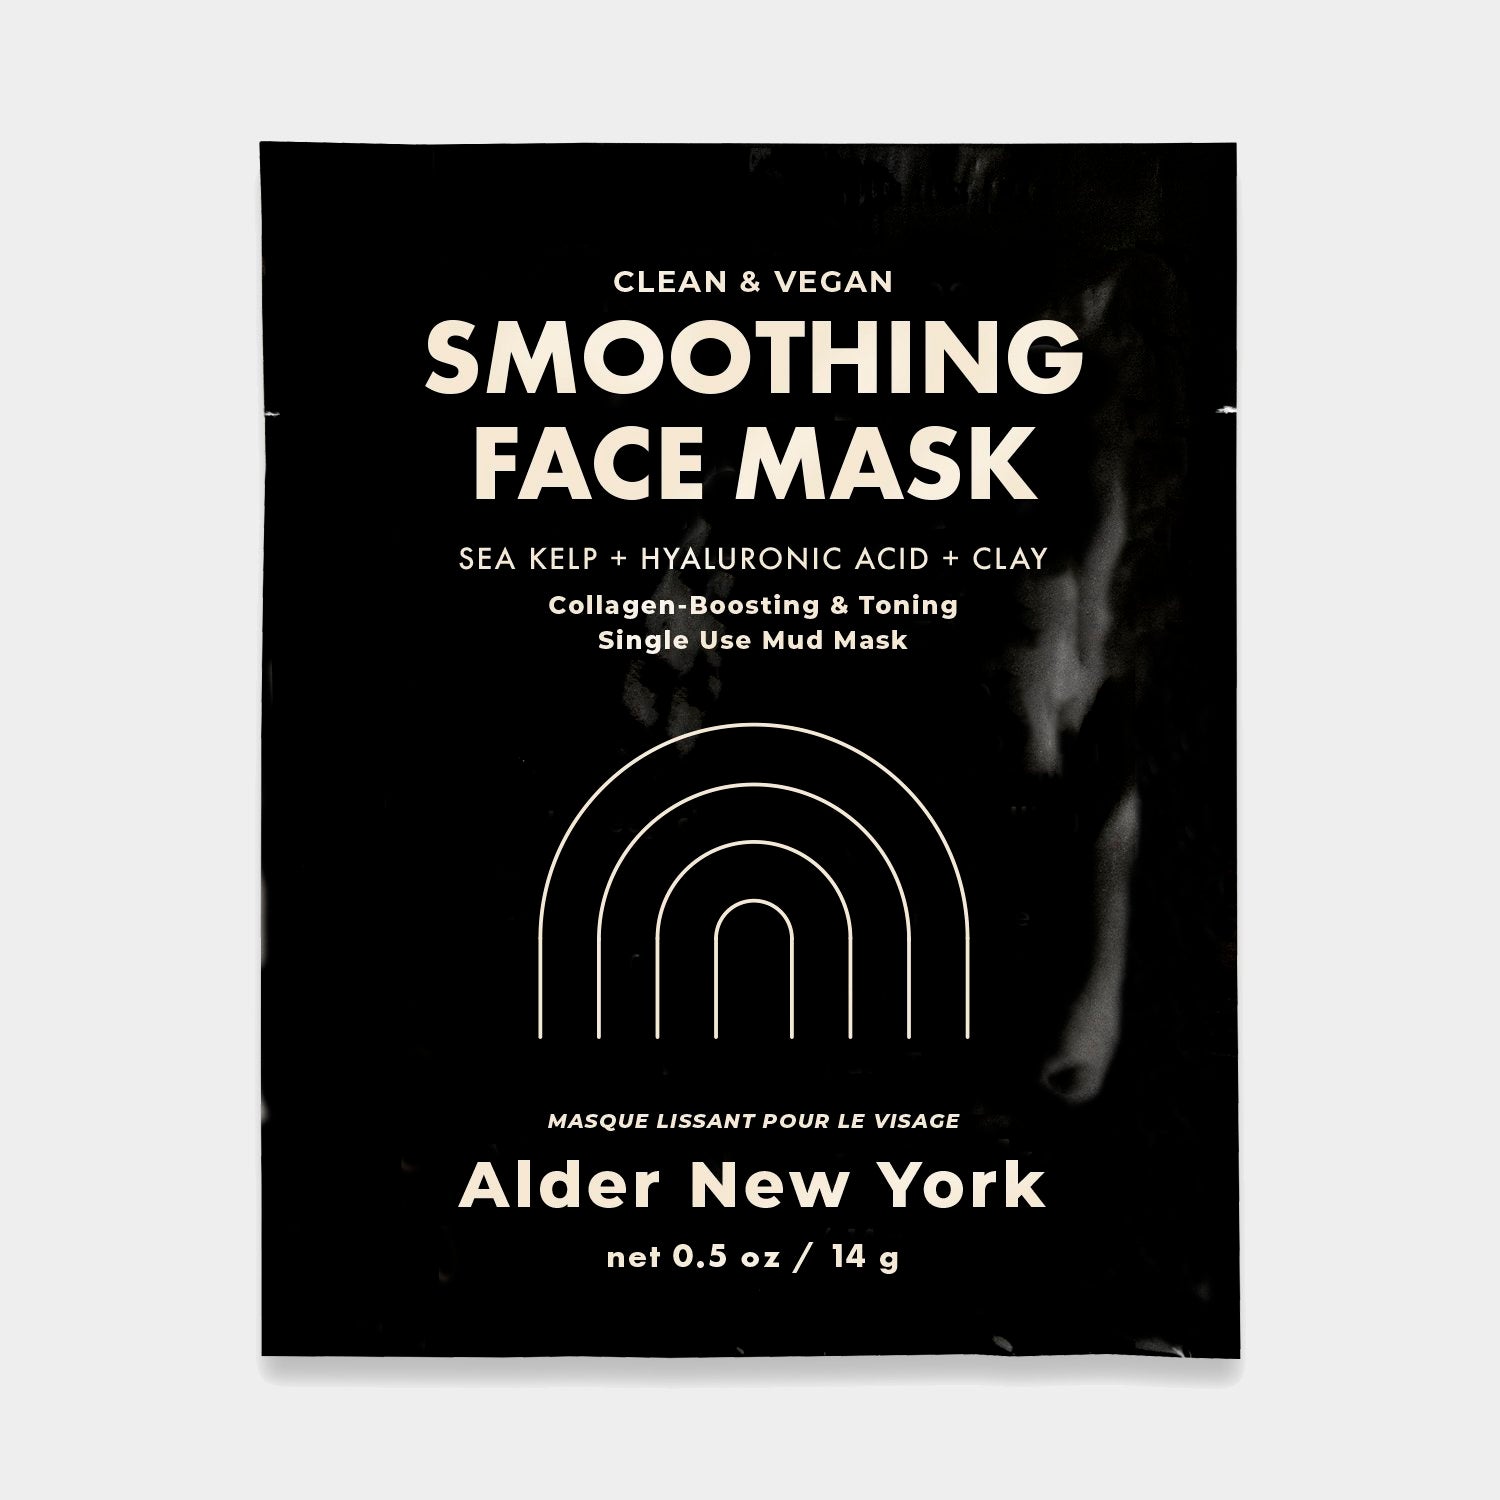 Smoothing Face Mask (Single Use) by Alder New York